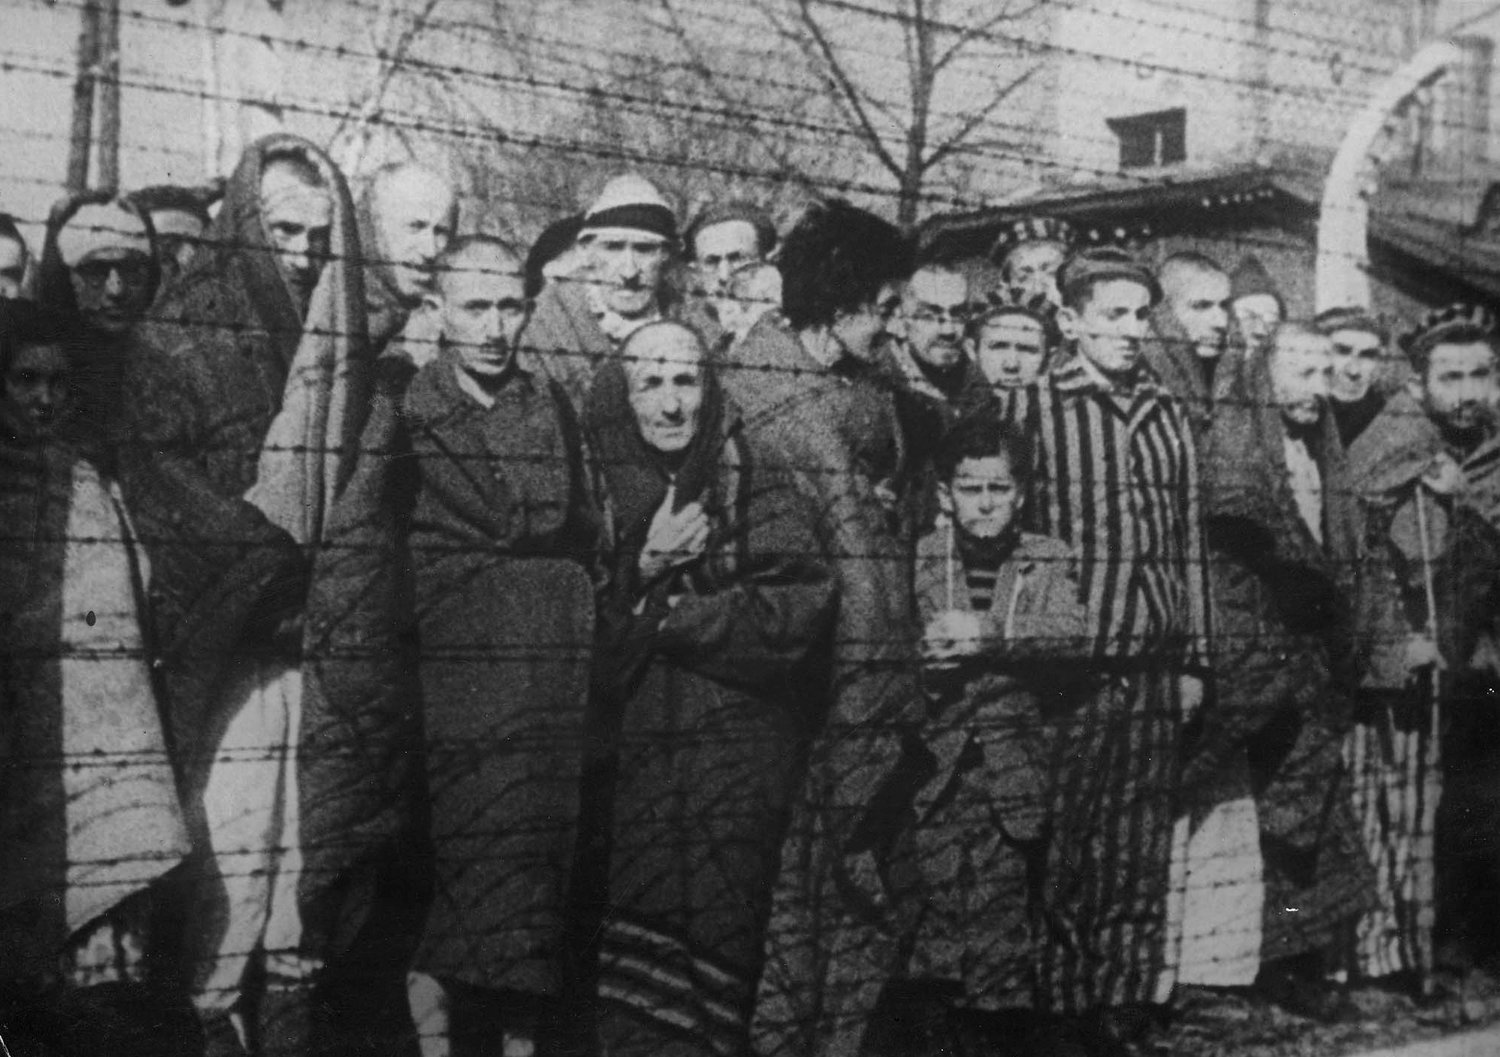 Men, women and children are seen behind barbed wire after the liberation of the Nazi death camp Auschwitz-Birkenau in 1945 in Oswiecim, Poland. Historians estimate that the Nazis sent at least 1.3 million people to Auschwitz between 1940-45, and it is believed that some 1.1 million of those perished there. Auschwitz was liberated by the Russian Army Jan. 27, 1945.